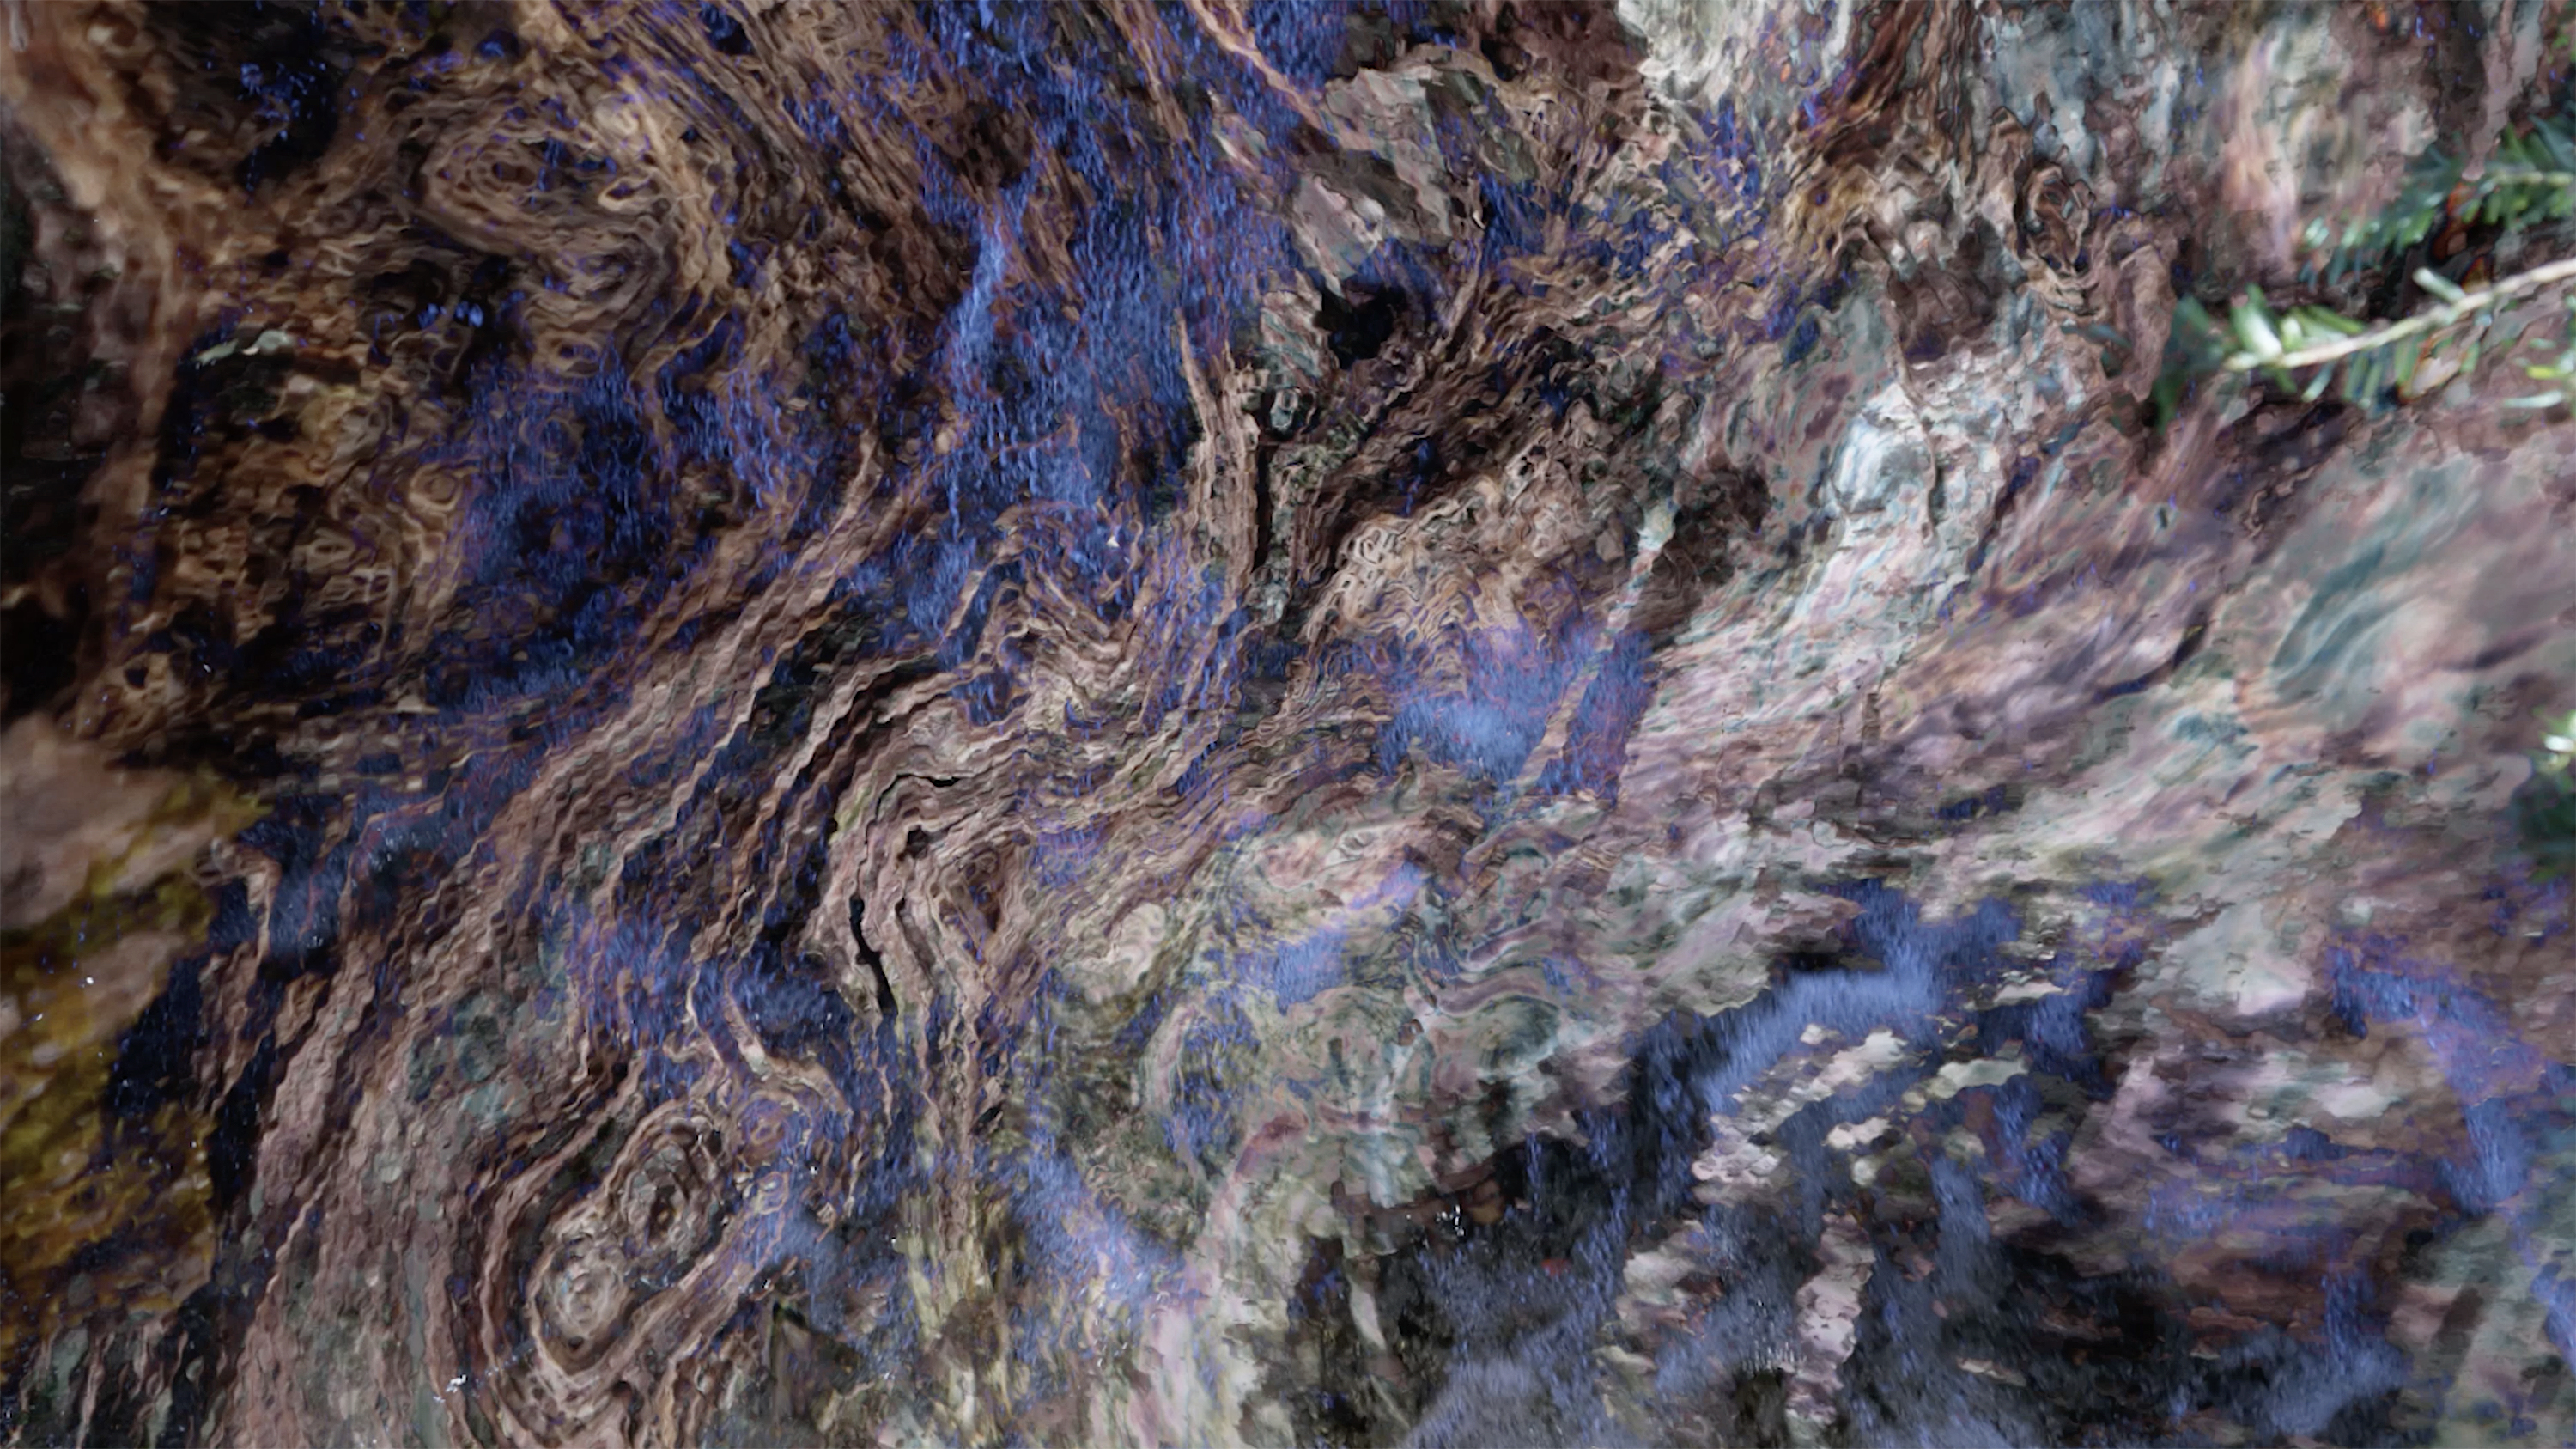 still from abstract animation of images shot in the woods